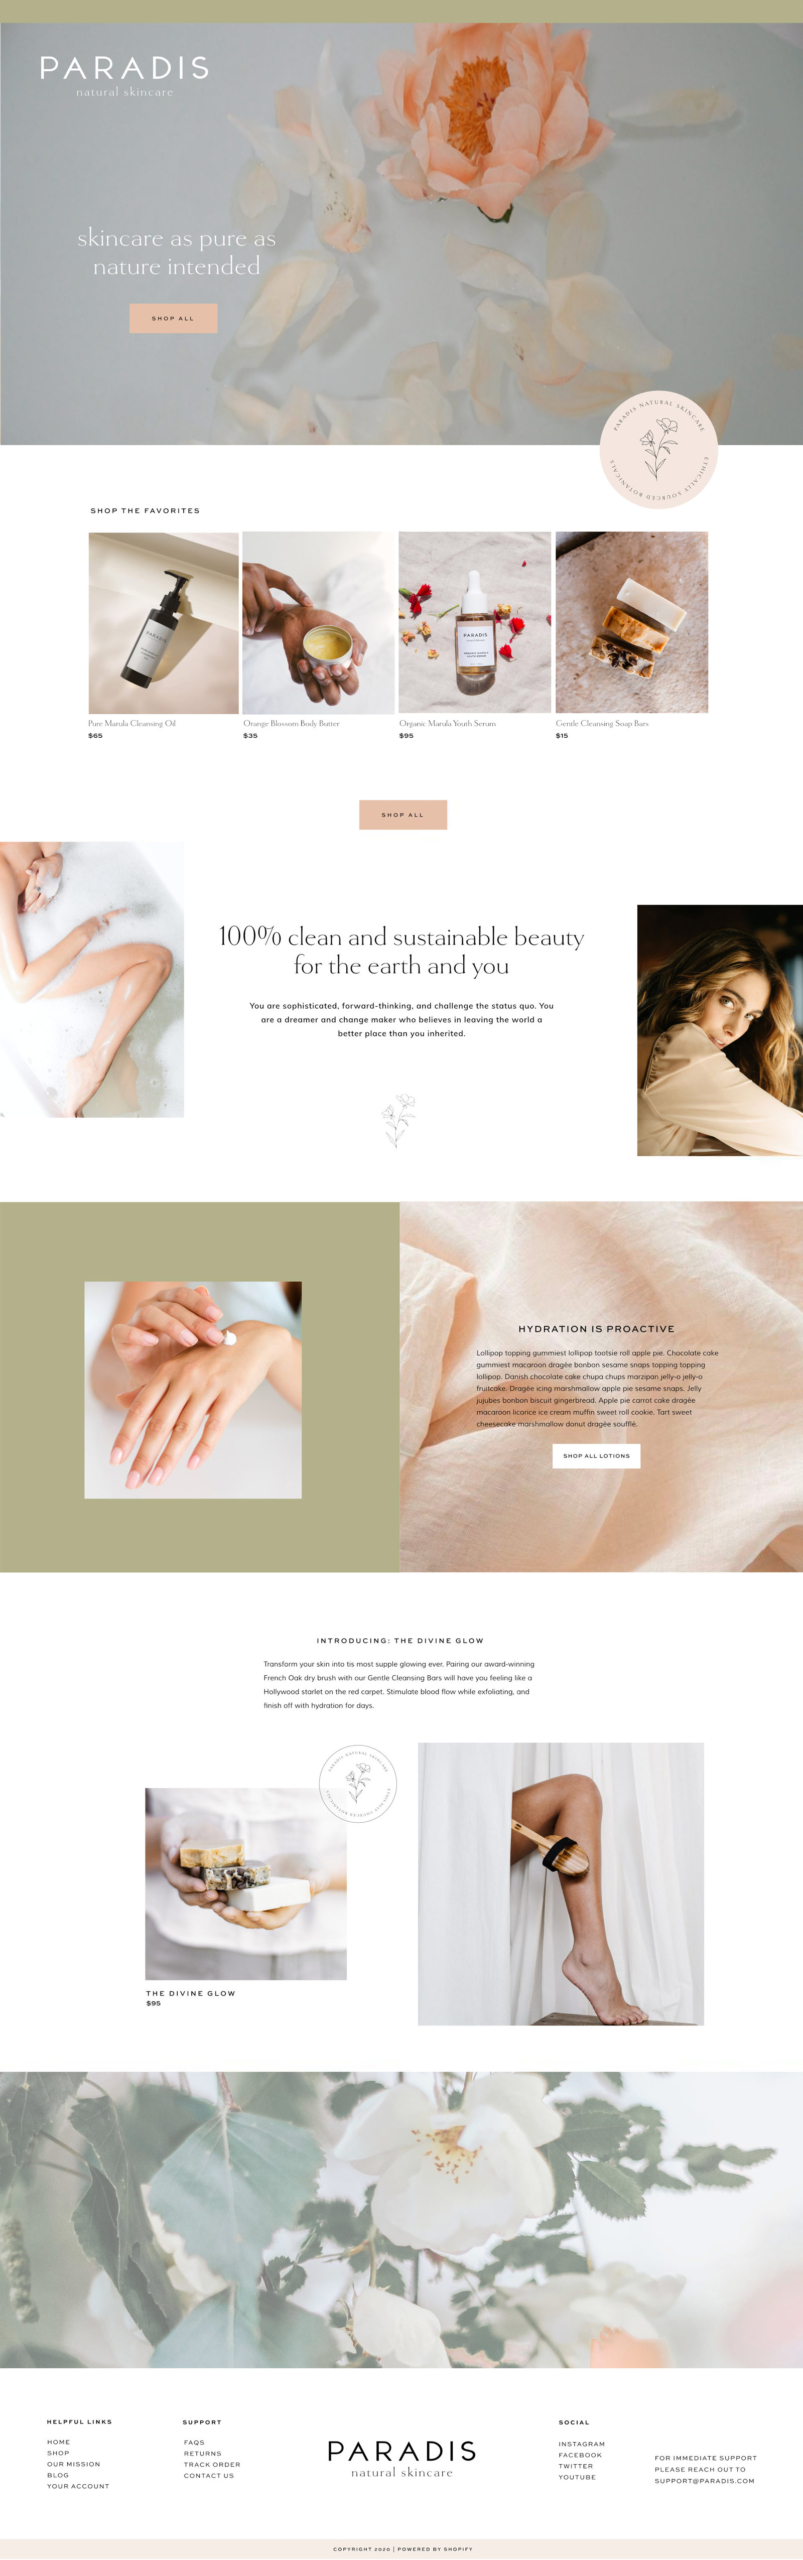 full page screenshot of a Shopify website design for skincare